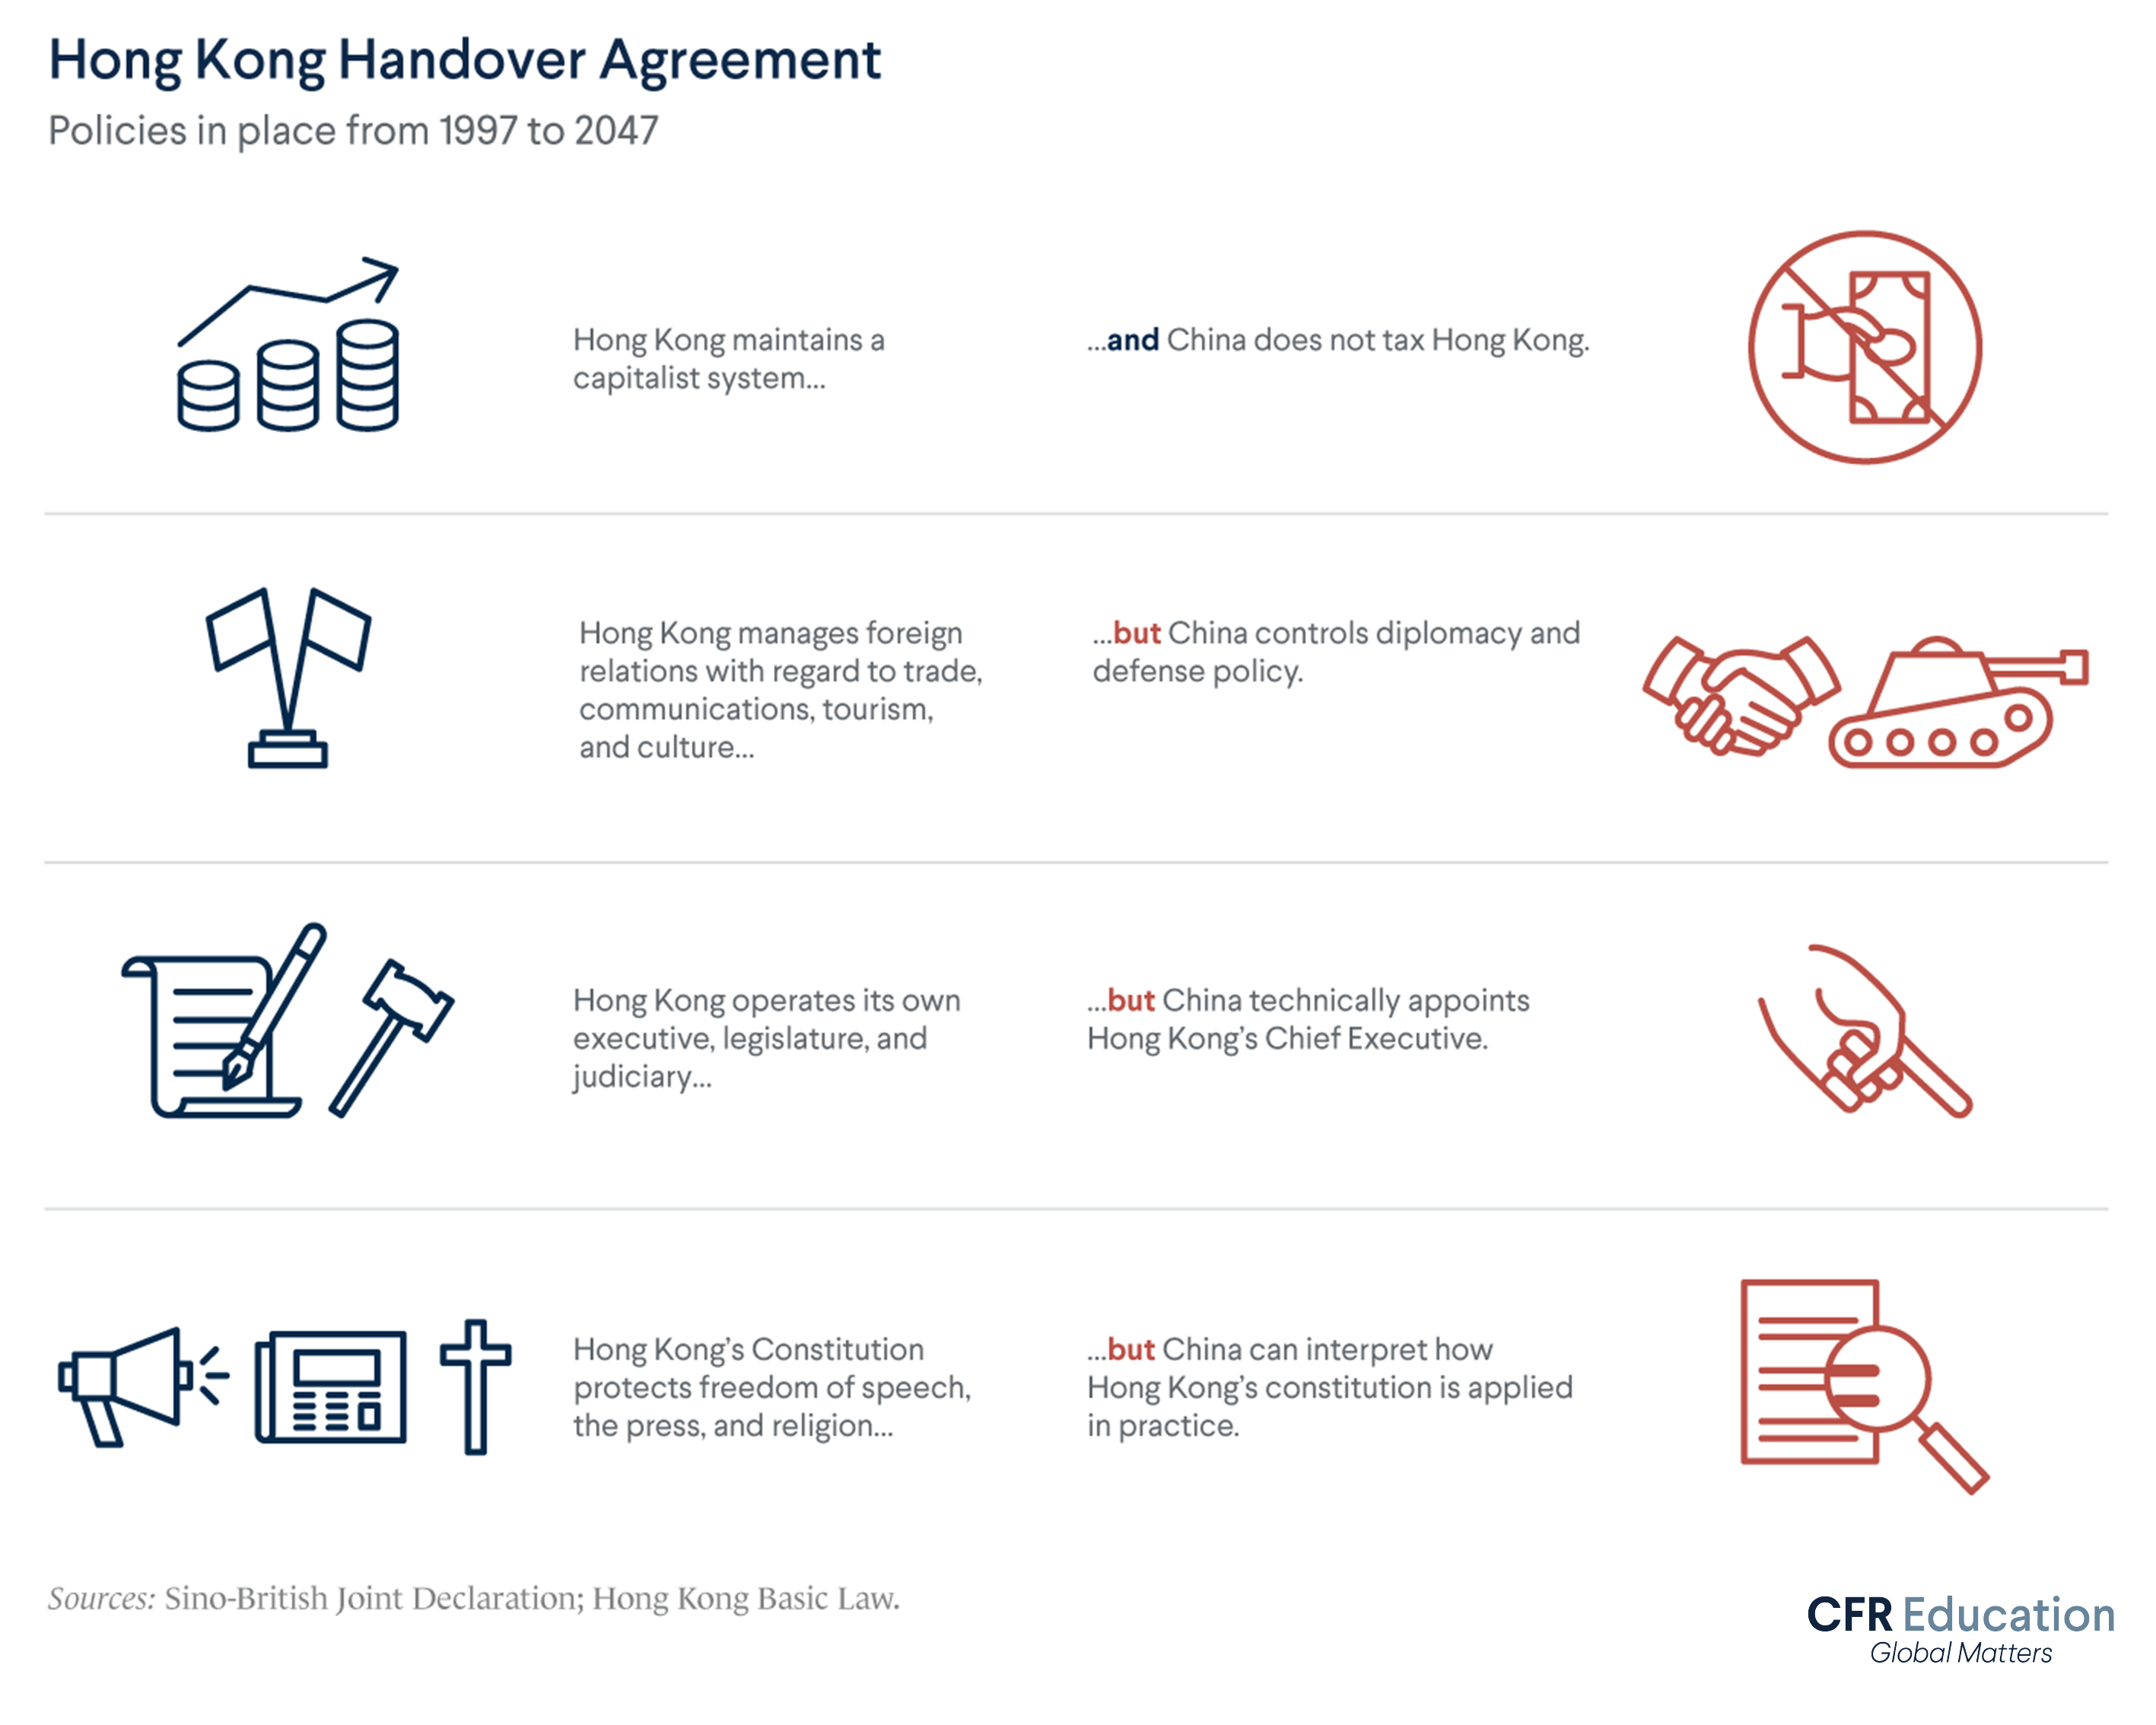 Infographic listing policies outlined in the Hong Kong handover agreement. Sources: Sino-British Joint Declaration and Hong Kong Basic Law. For more info contact us at cfr_education@cfr.org.